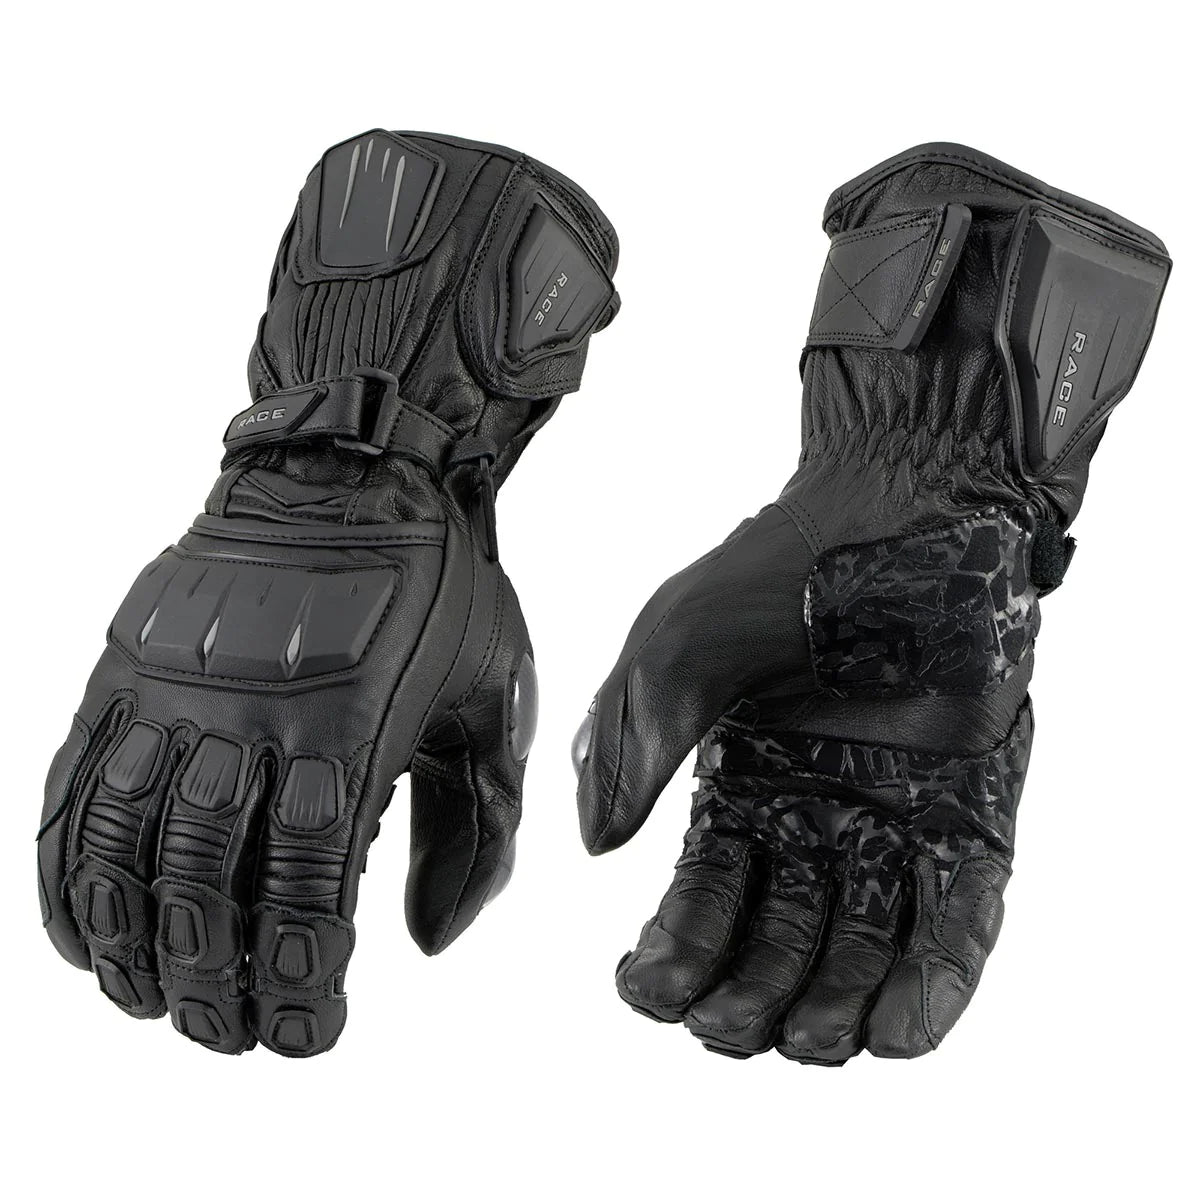 Men's Black Leather Gauntlet Racing Motorcycle Hand Gloves W/ Hard Knuckle Protection Extra Grip Reinforced Palm